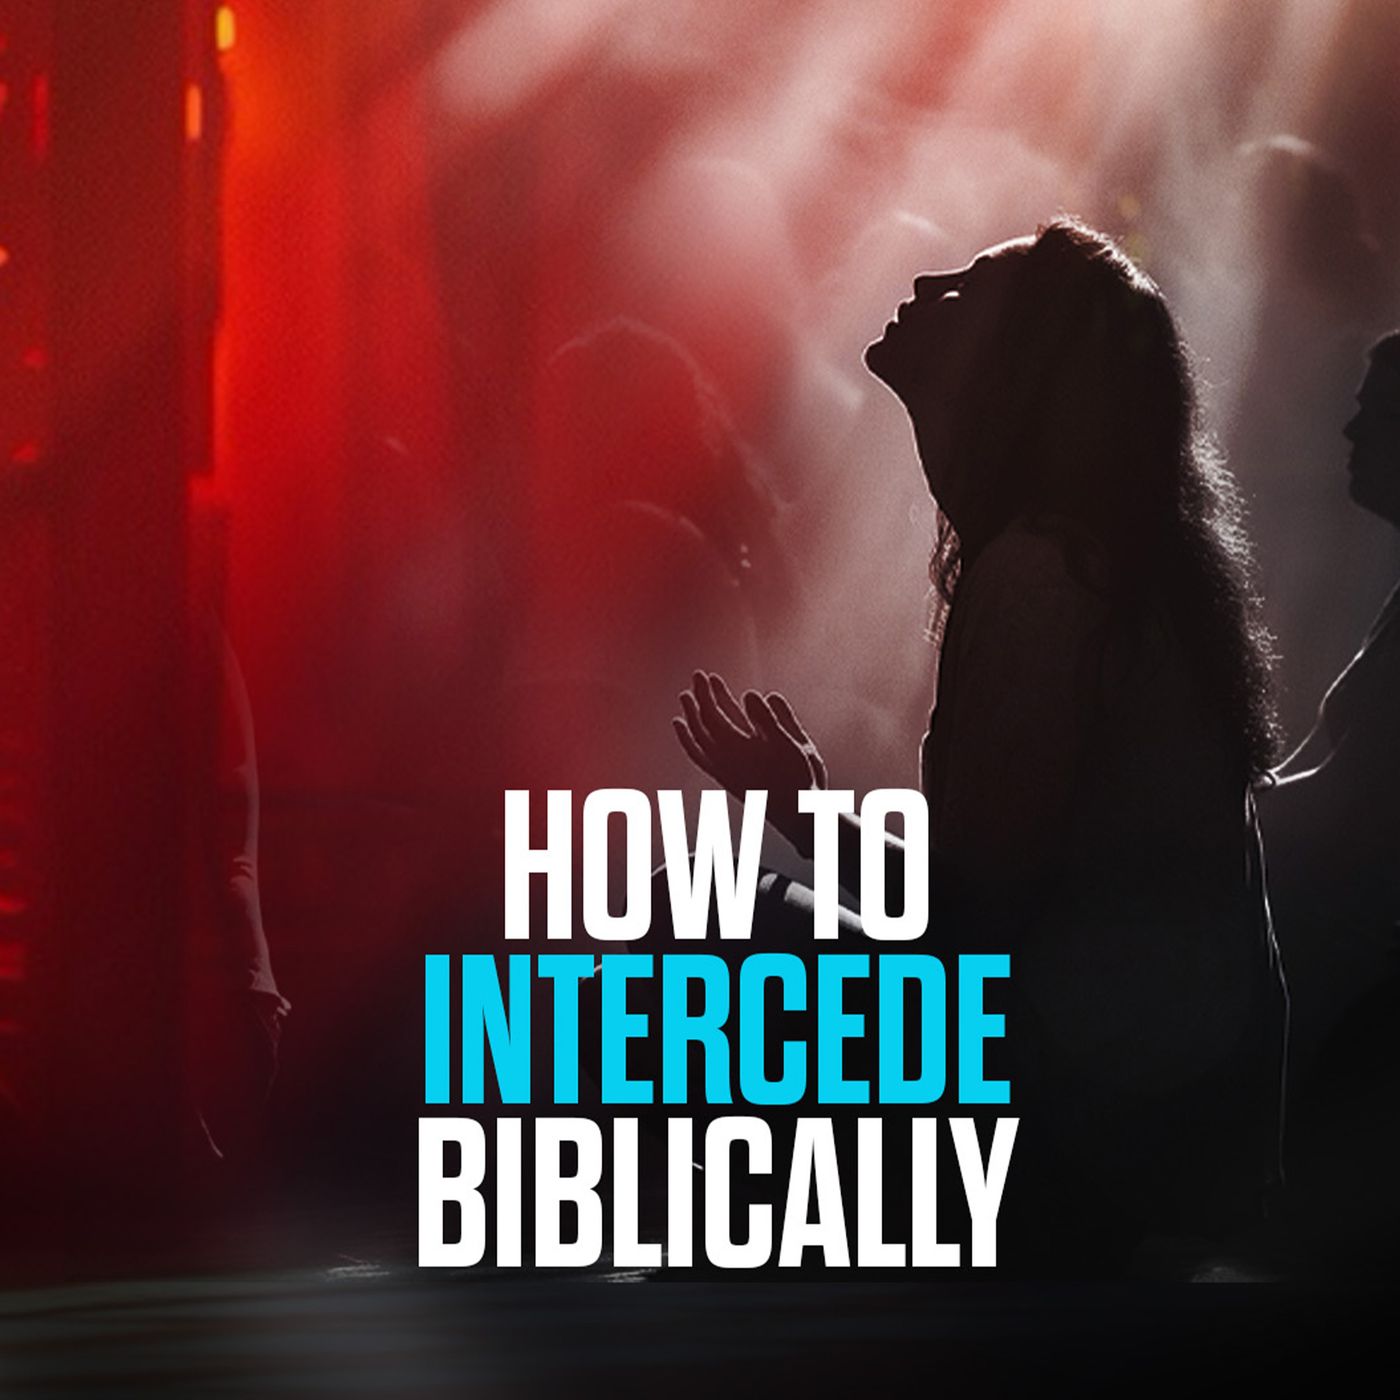 How To Intercede